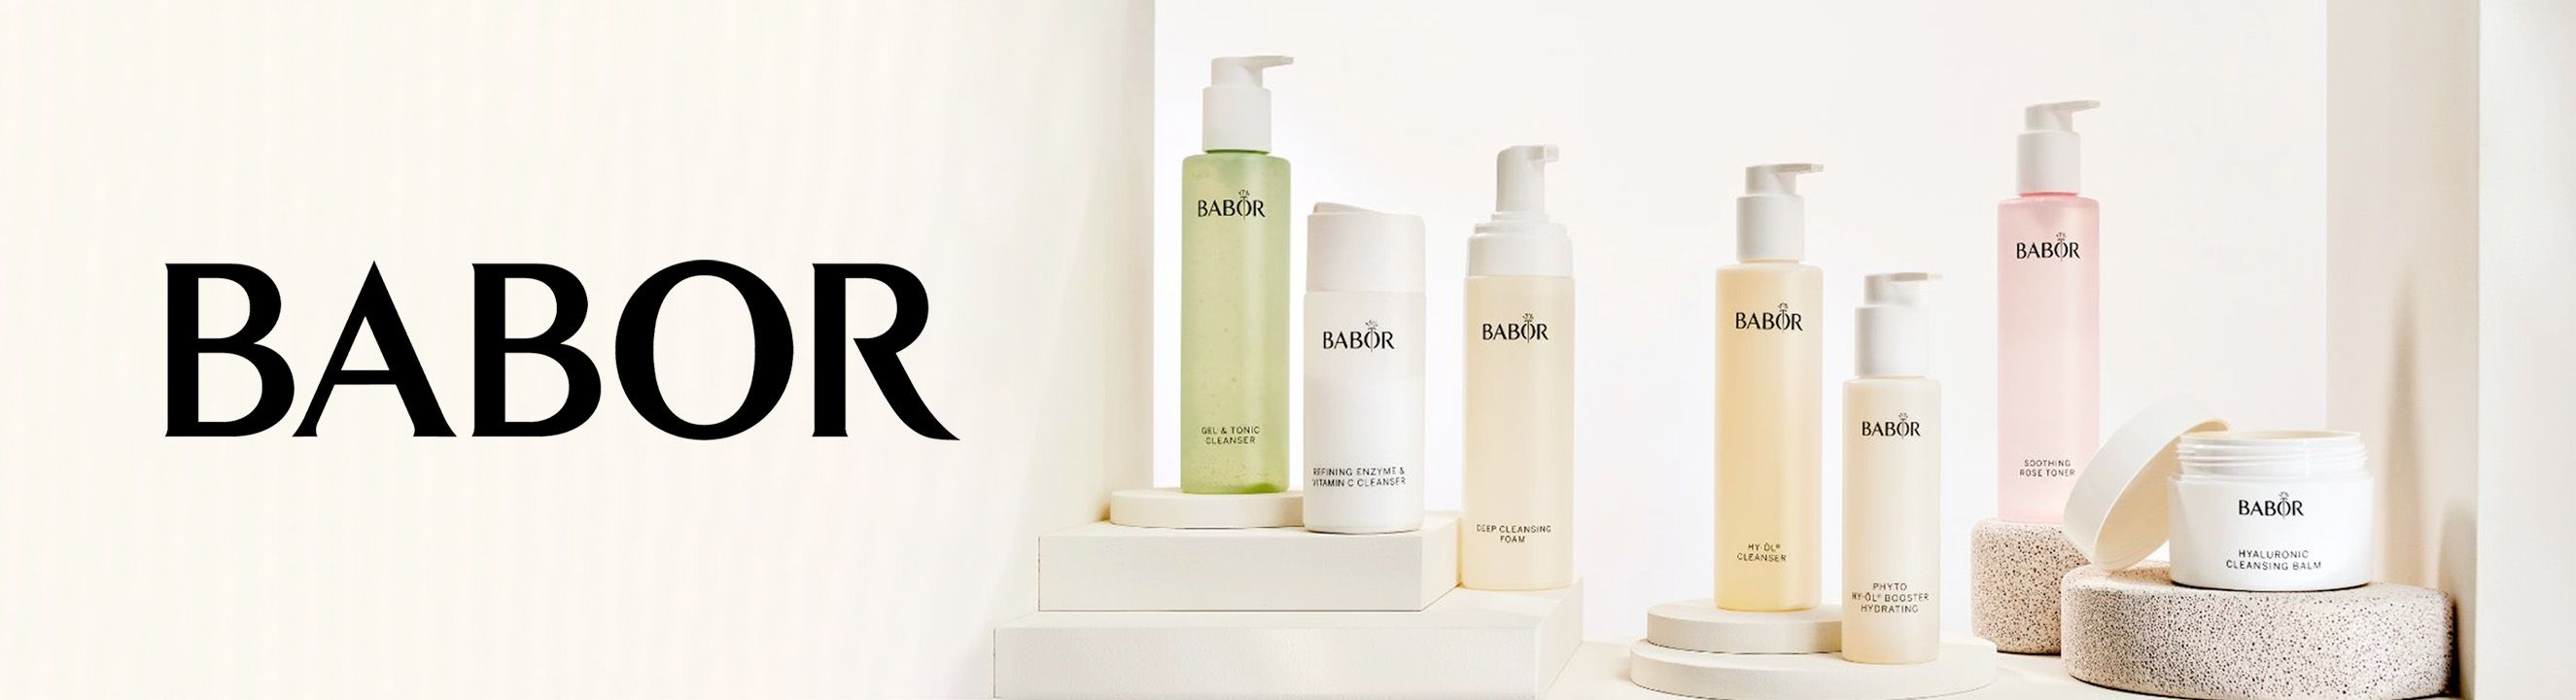 babor-collection